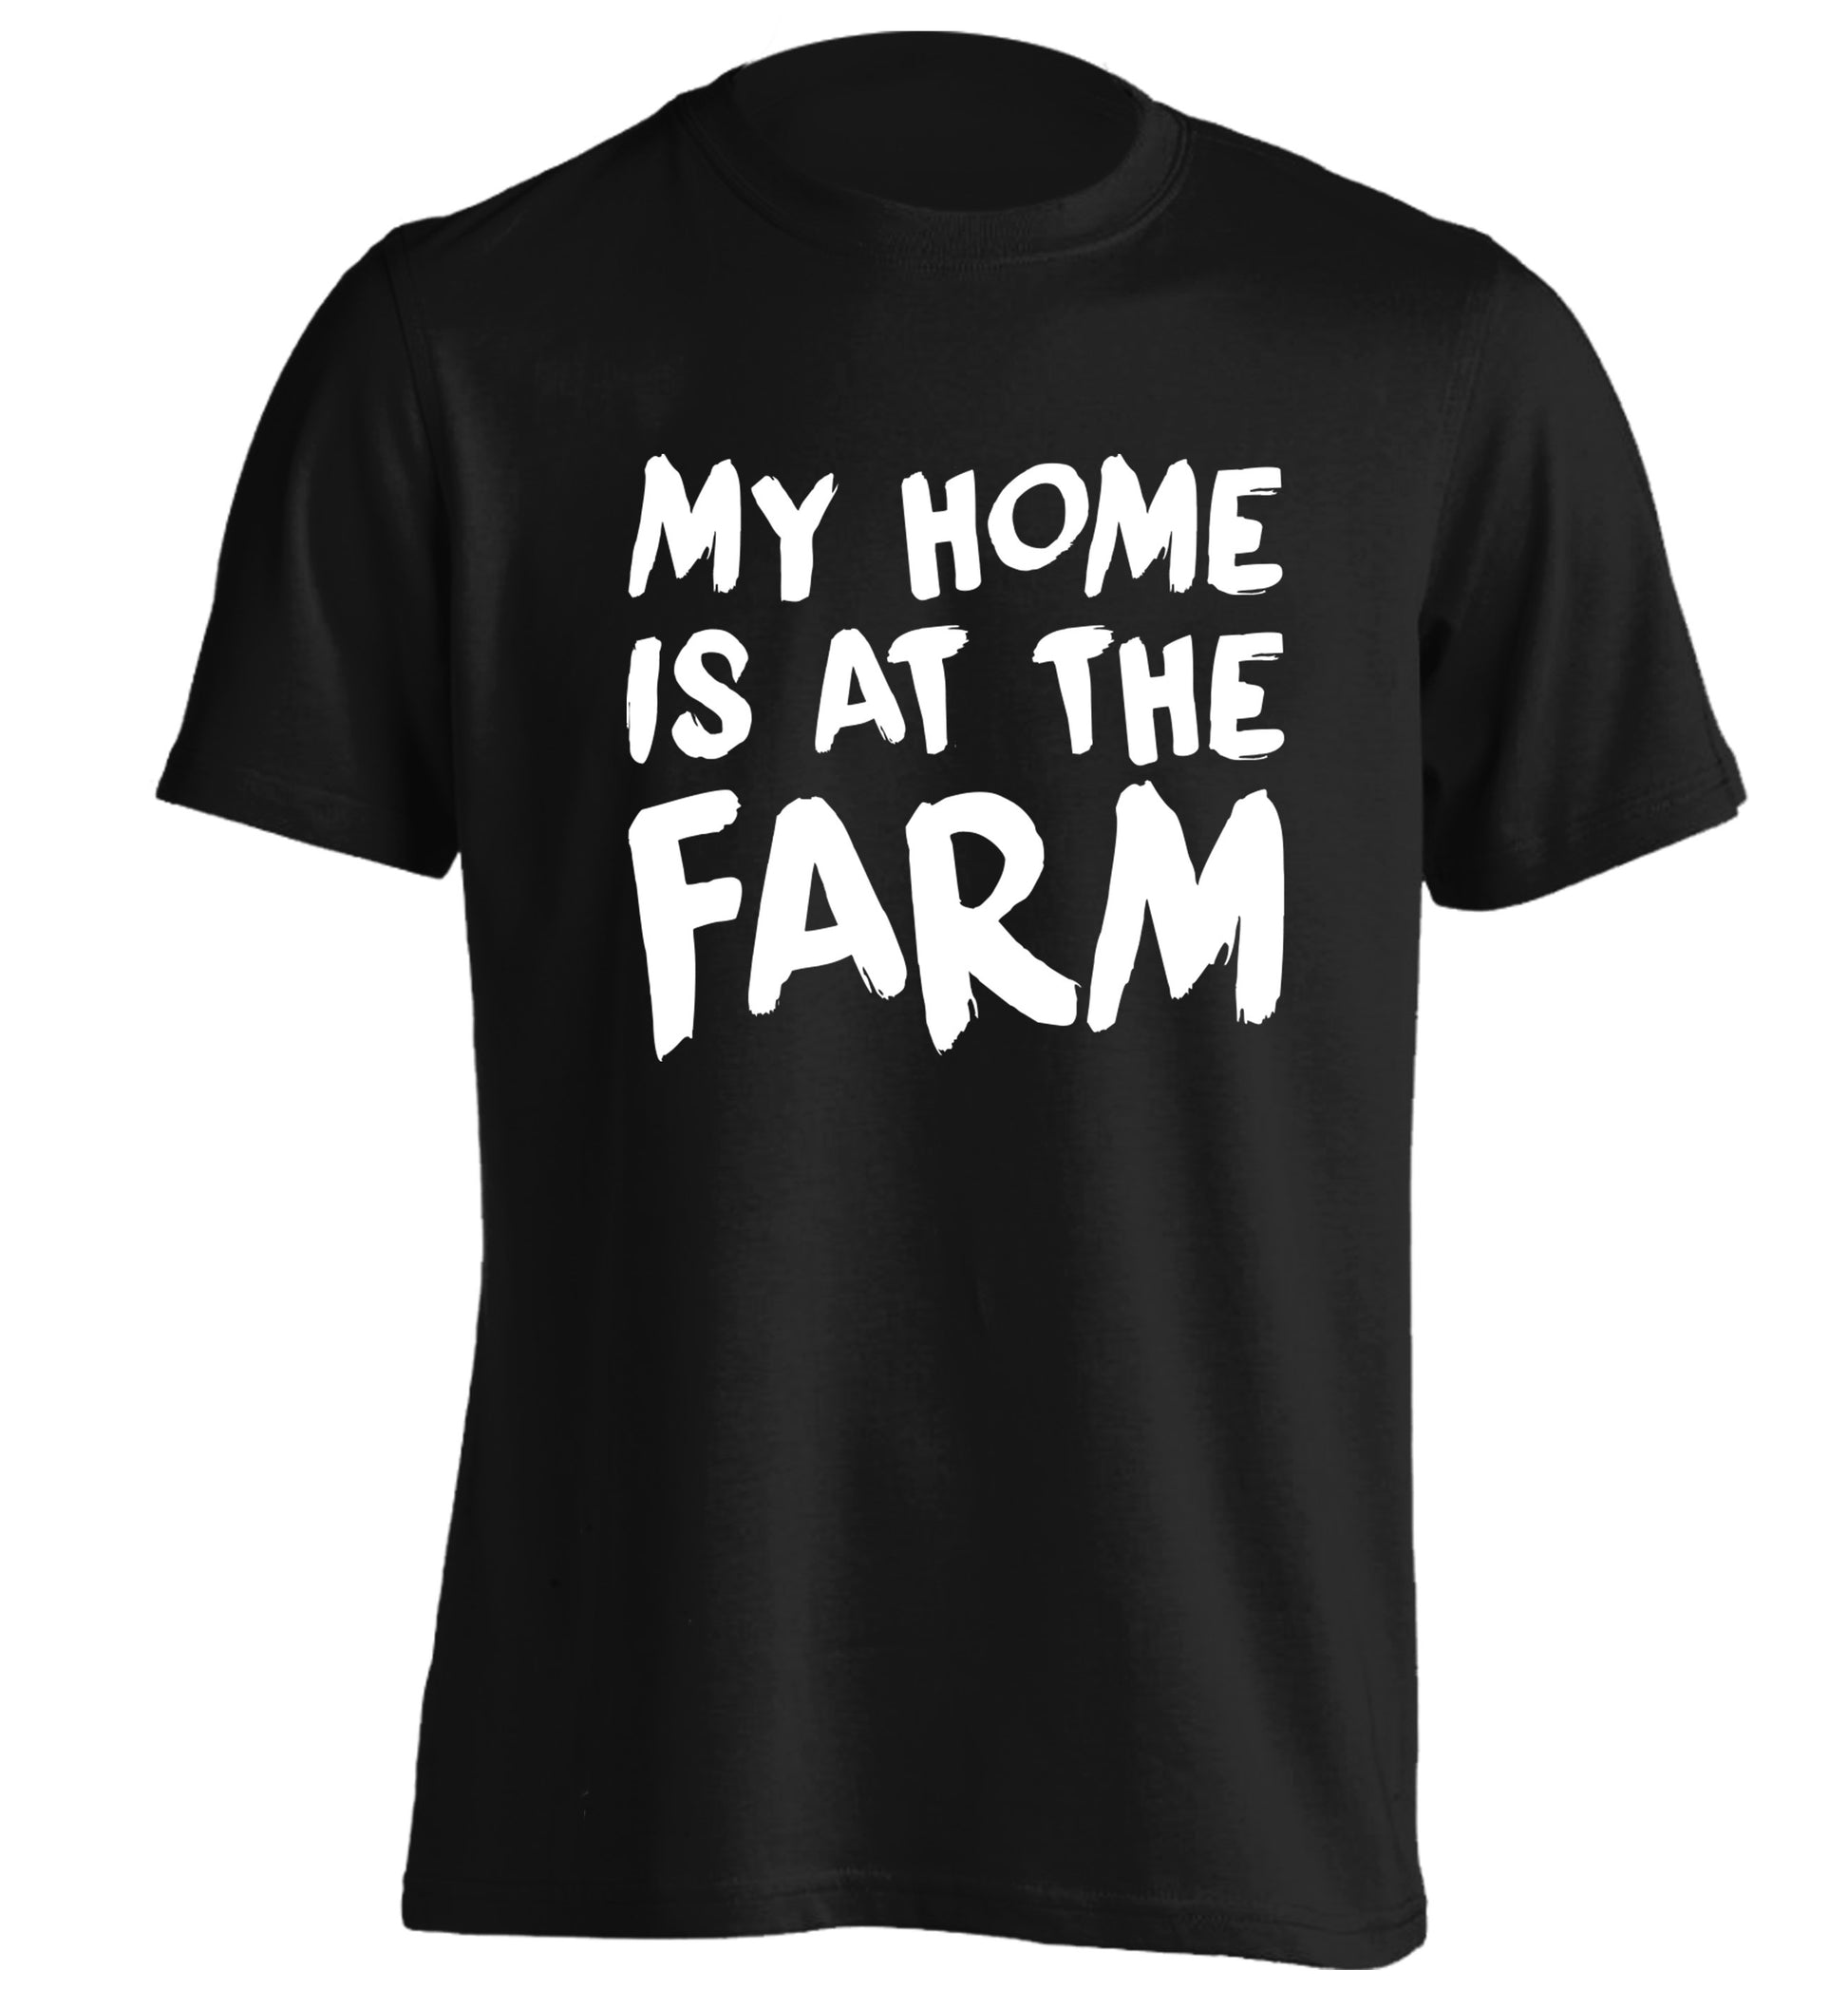 My home is at the farm adults unisex black Tshirt 2XL